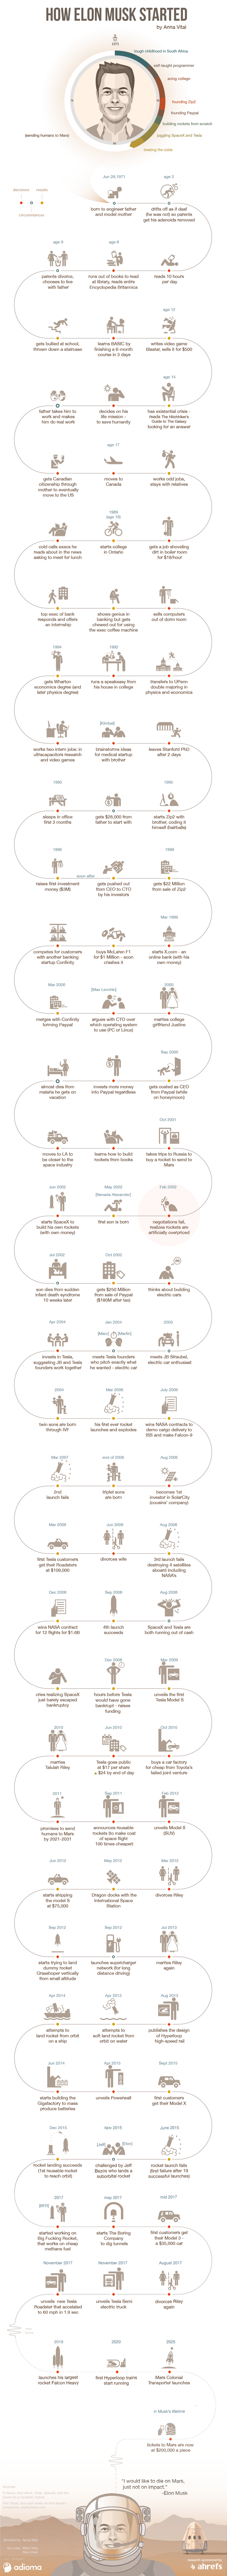 Elon Musk Whole Life Journey glimpse in one Infographic